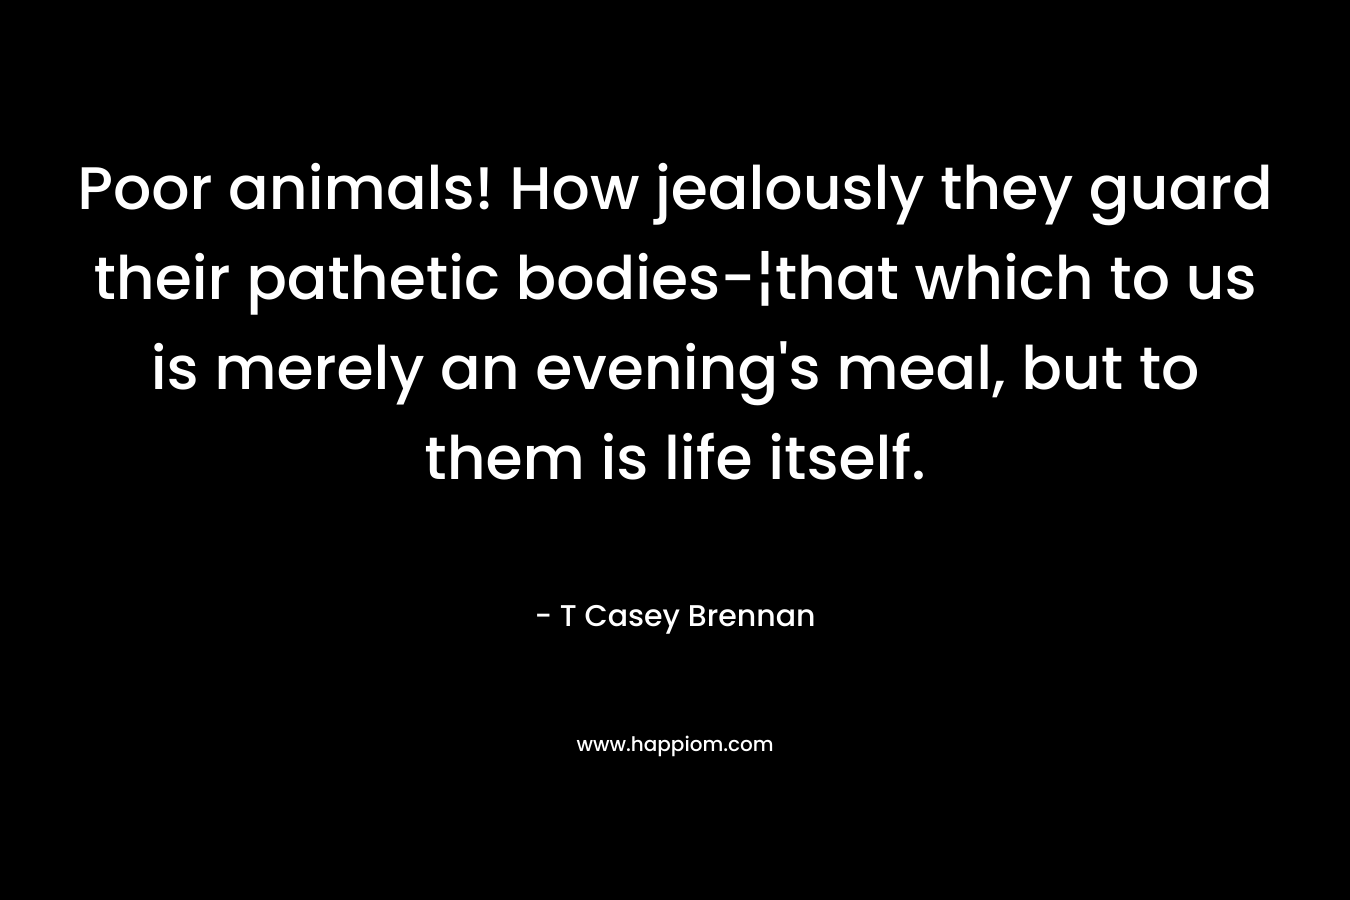 Poor animals! How jealously they guard their pathetic bodies-¦that which to us is merely an evening's meal, but to them is life itself.